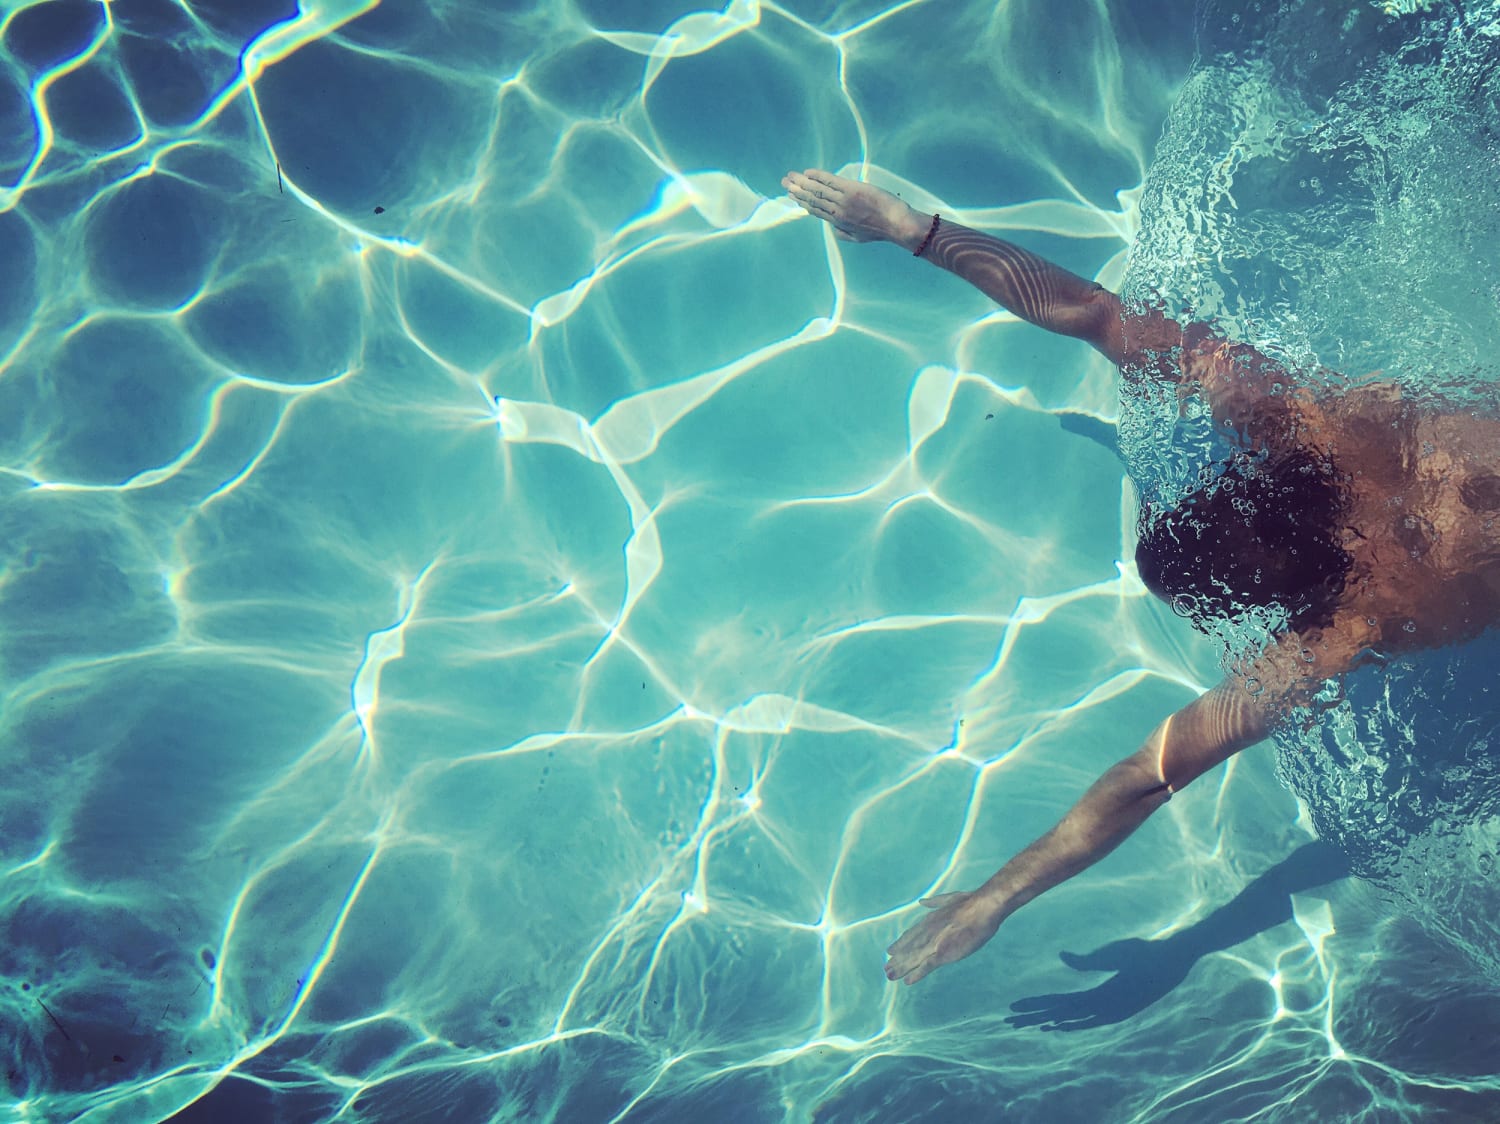 Hard-to-kill germs may be lurking in your hotel pool, CDC says